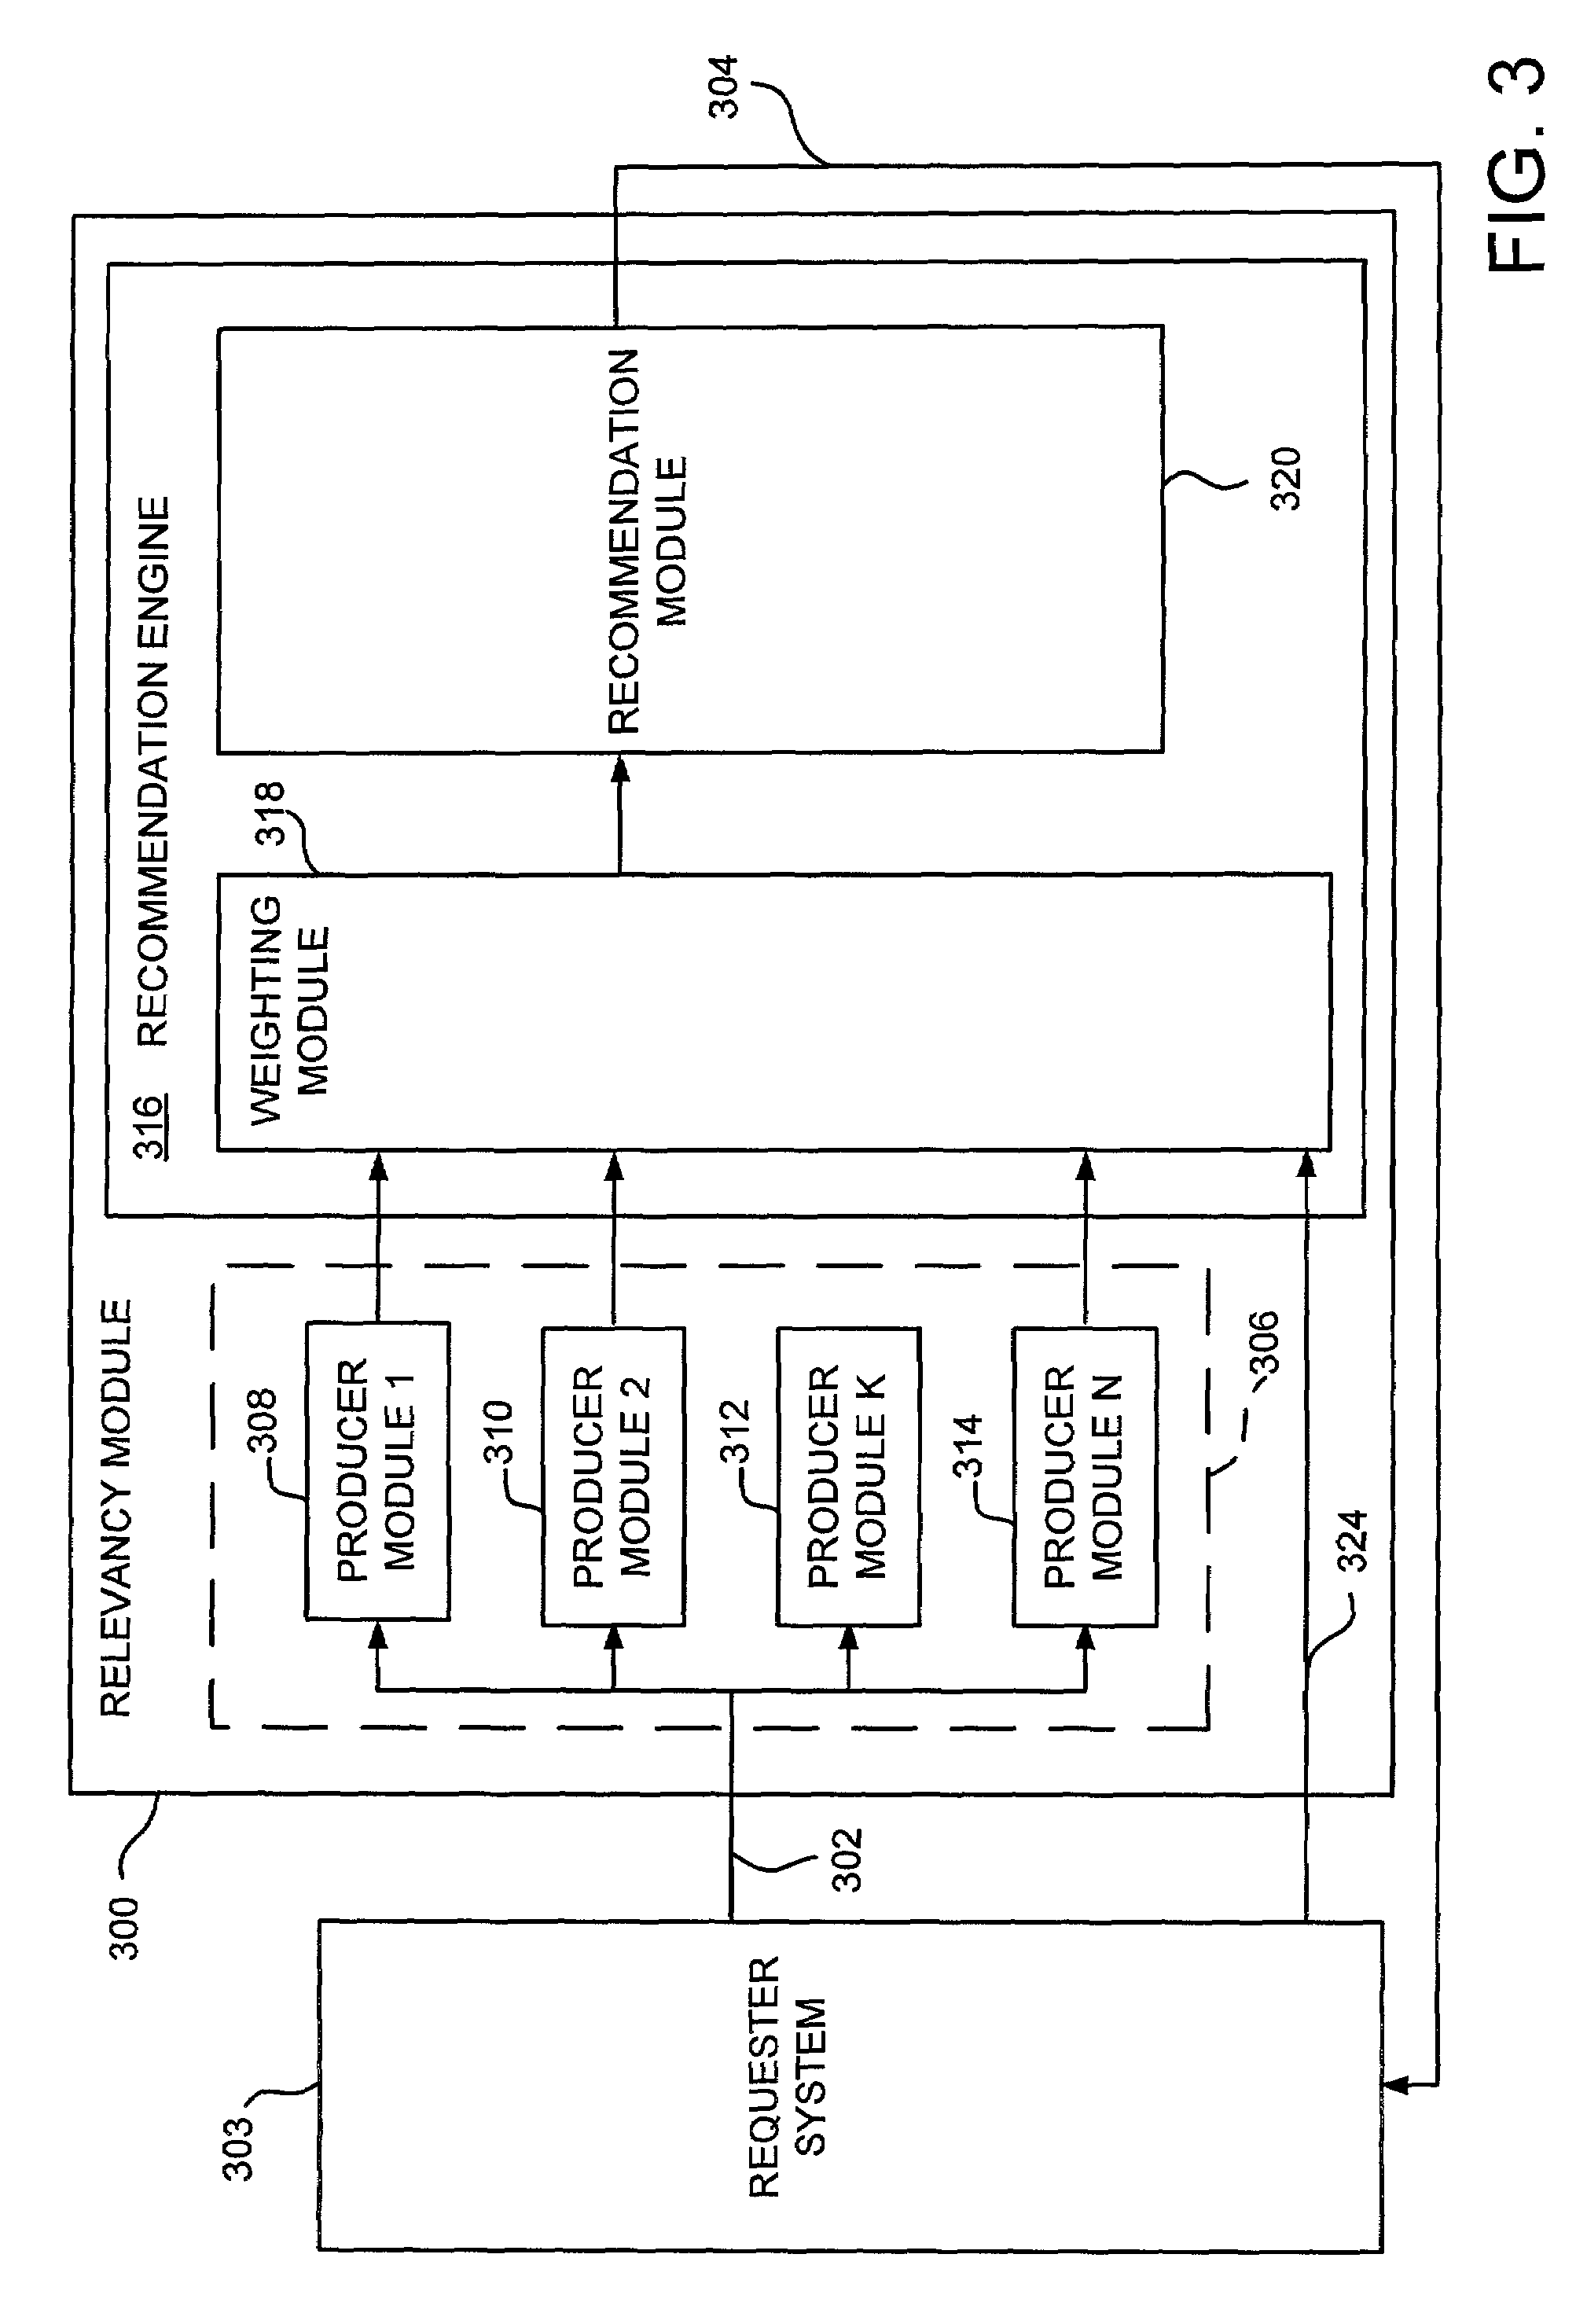 System and method for adaptively selecting and delivering recommendations to a requester